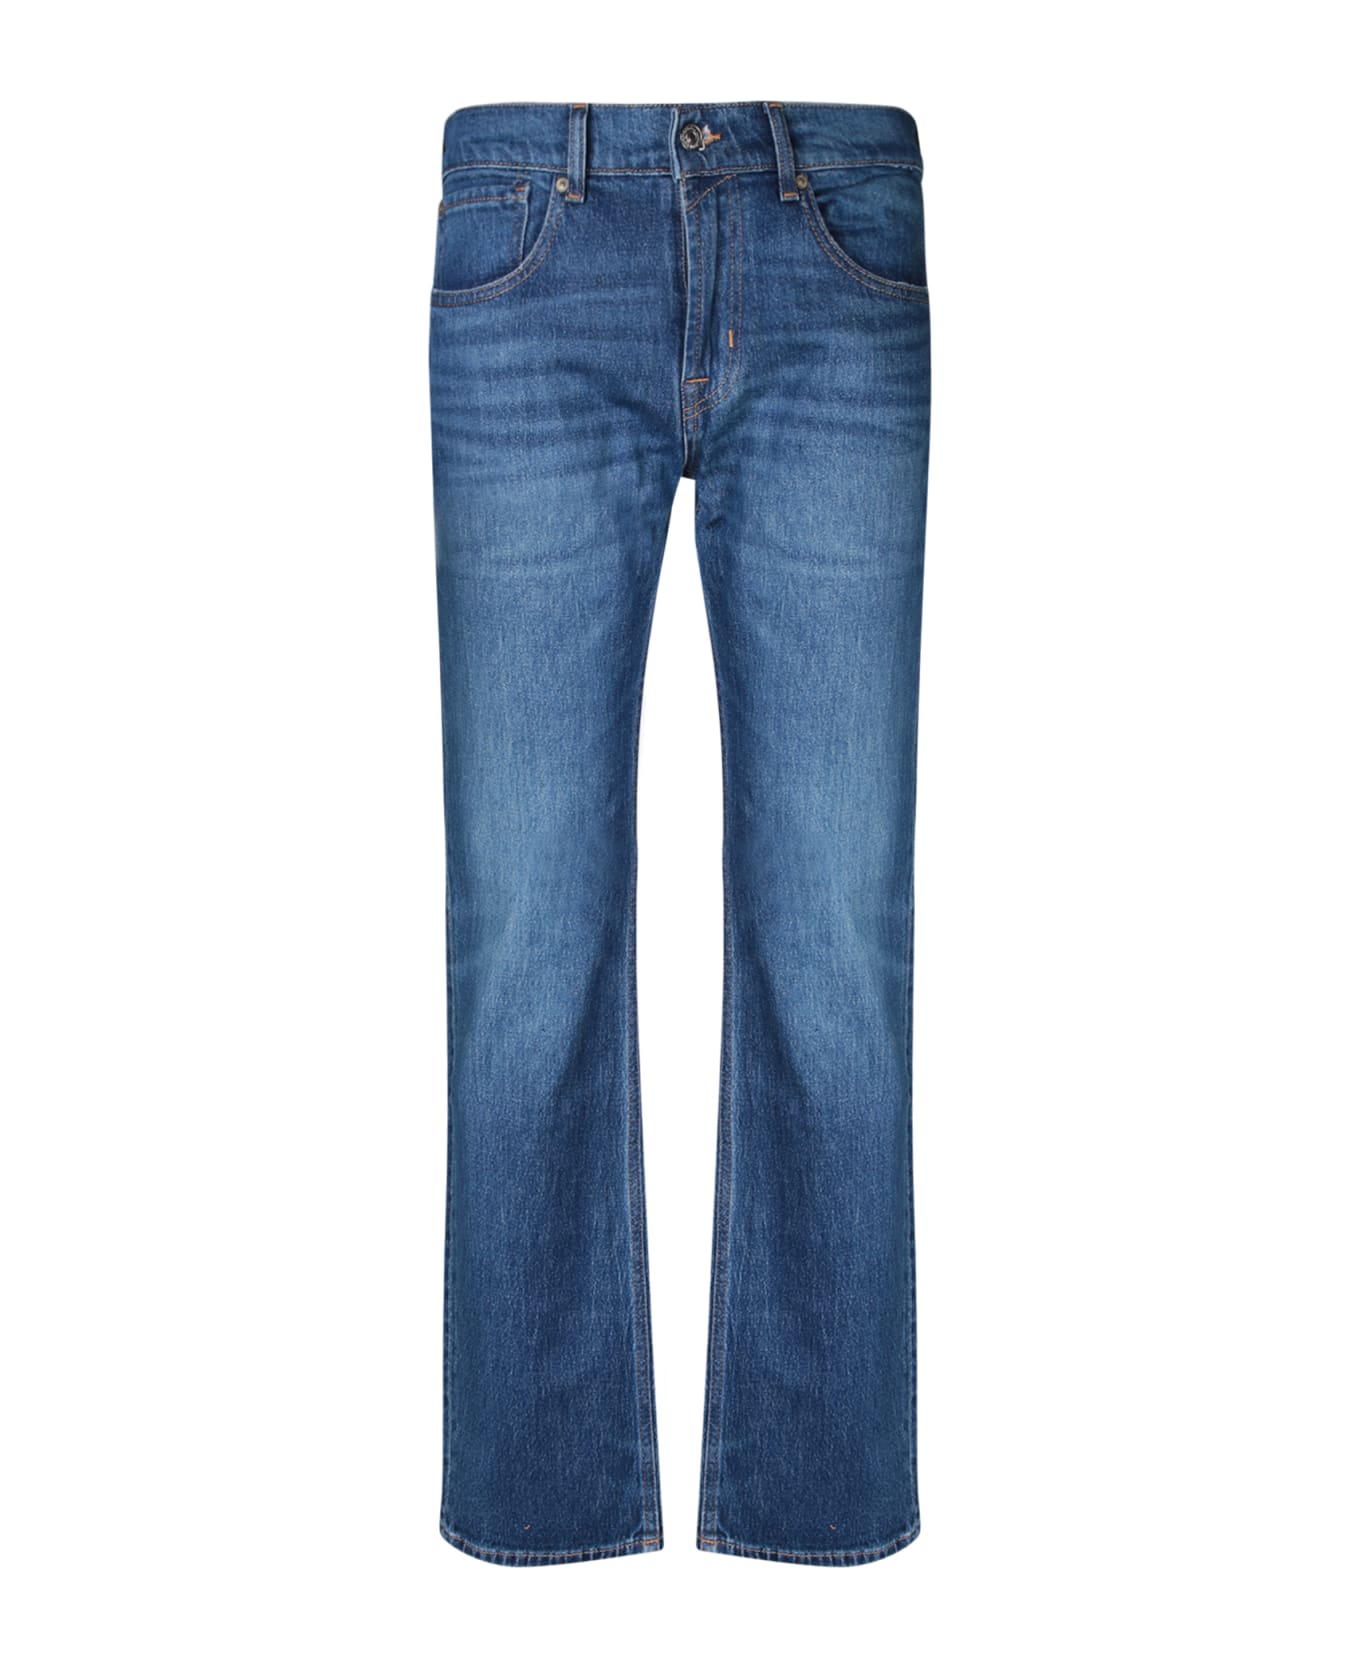 7 For All Mankind The Straight Exchange Blue Jeans - Blue デニム